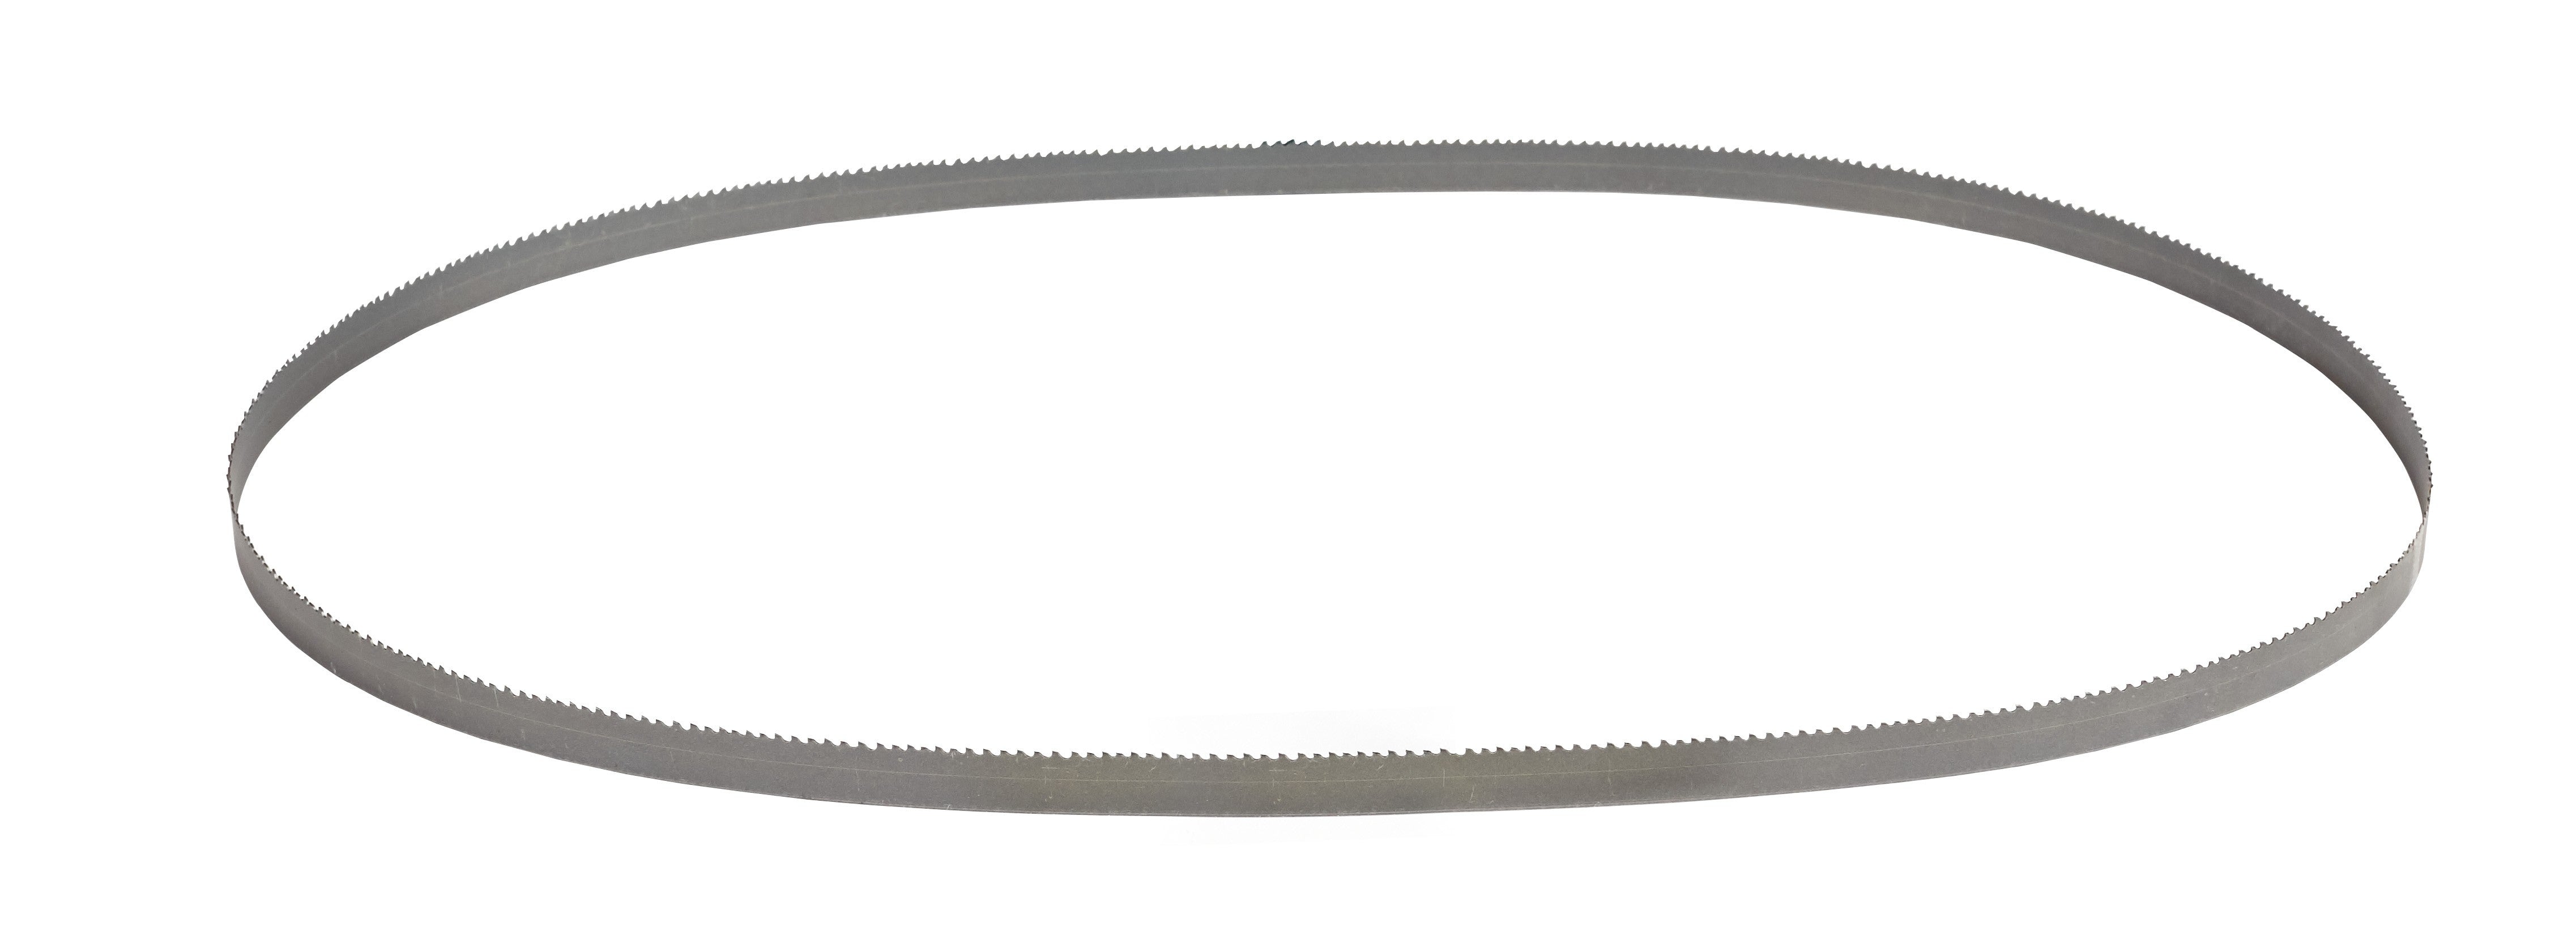 Milwaukee 48-39-0536 24TPI Compact Band Saw Blades 25-Pack